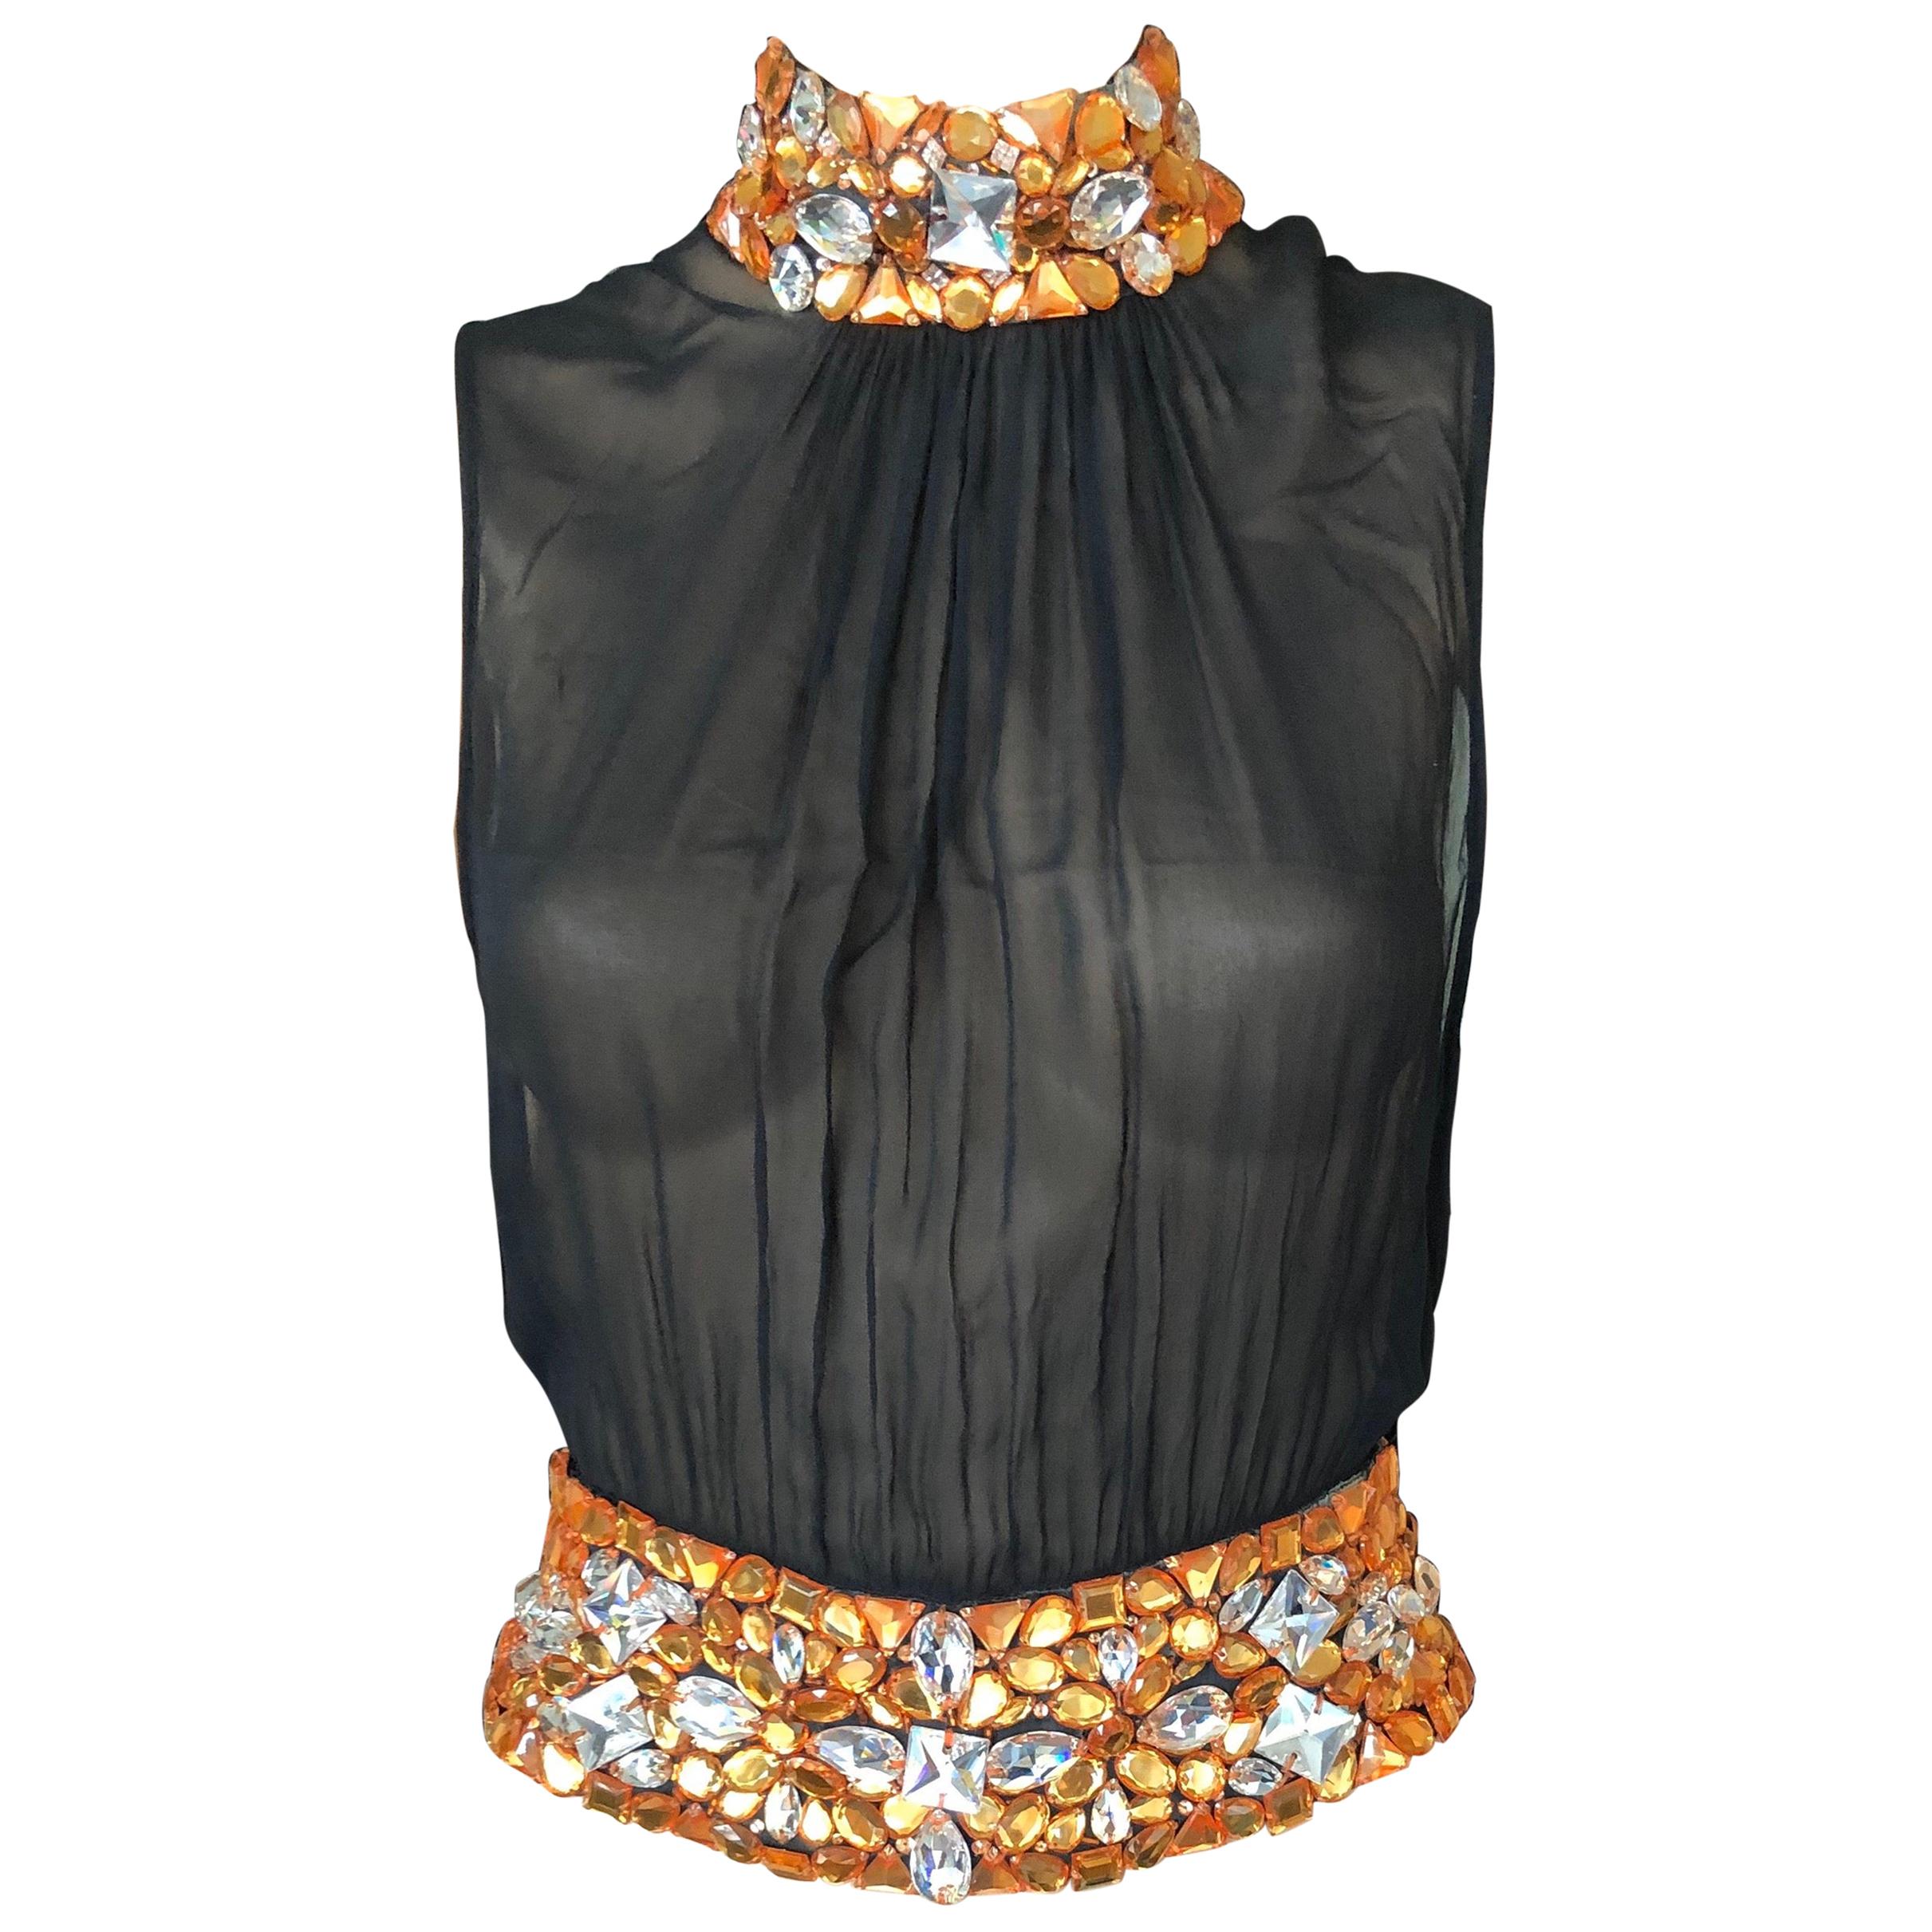 Gianni Versace Couture S/S 2000 Runway Embellished Sheer Black Top IT 40